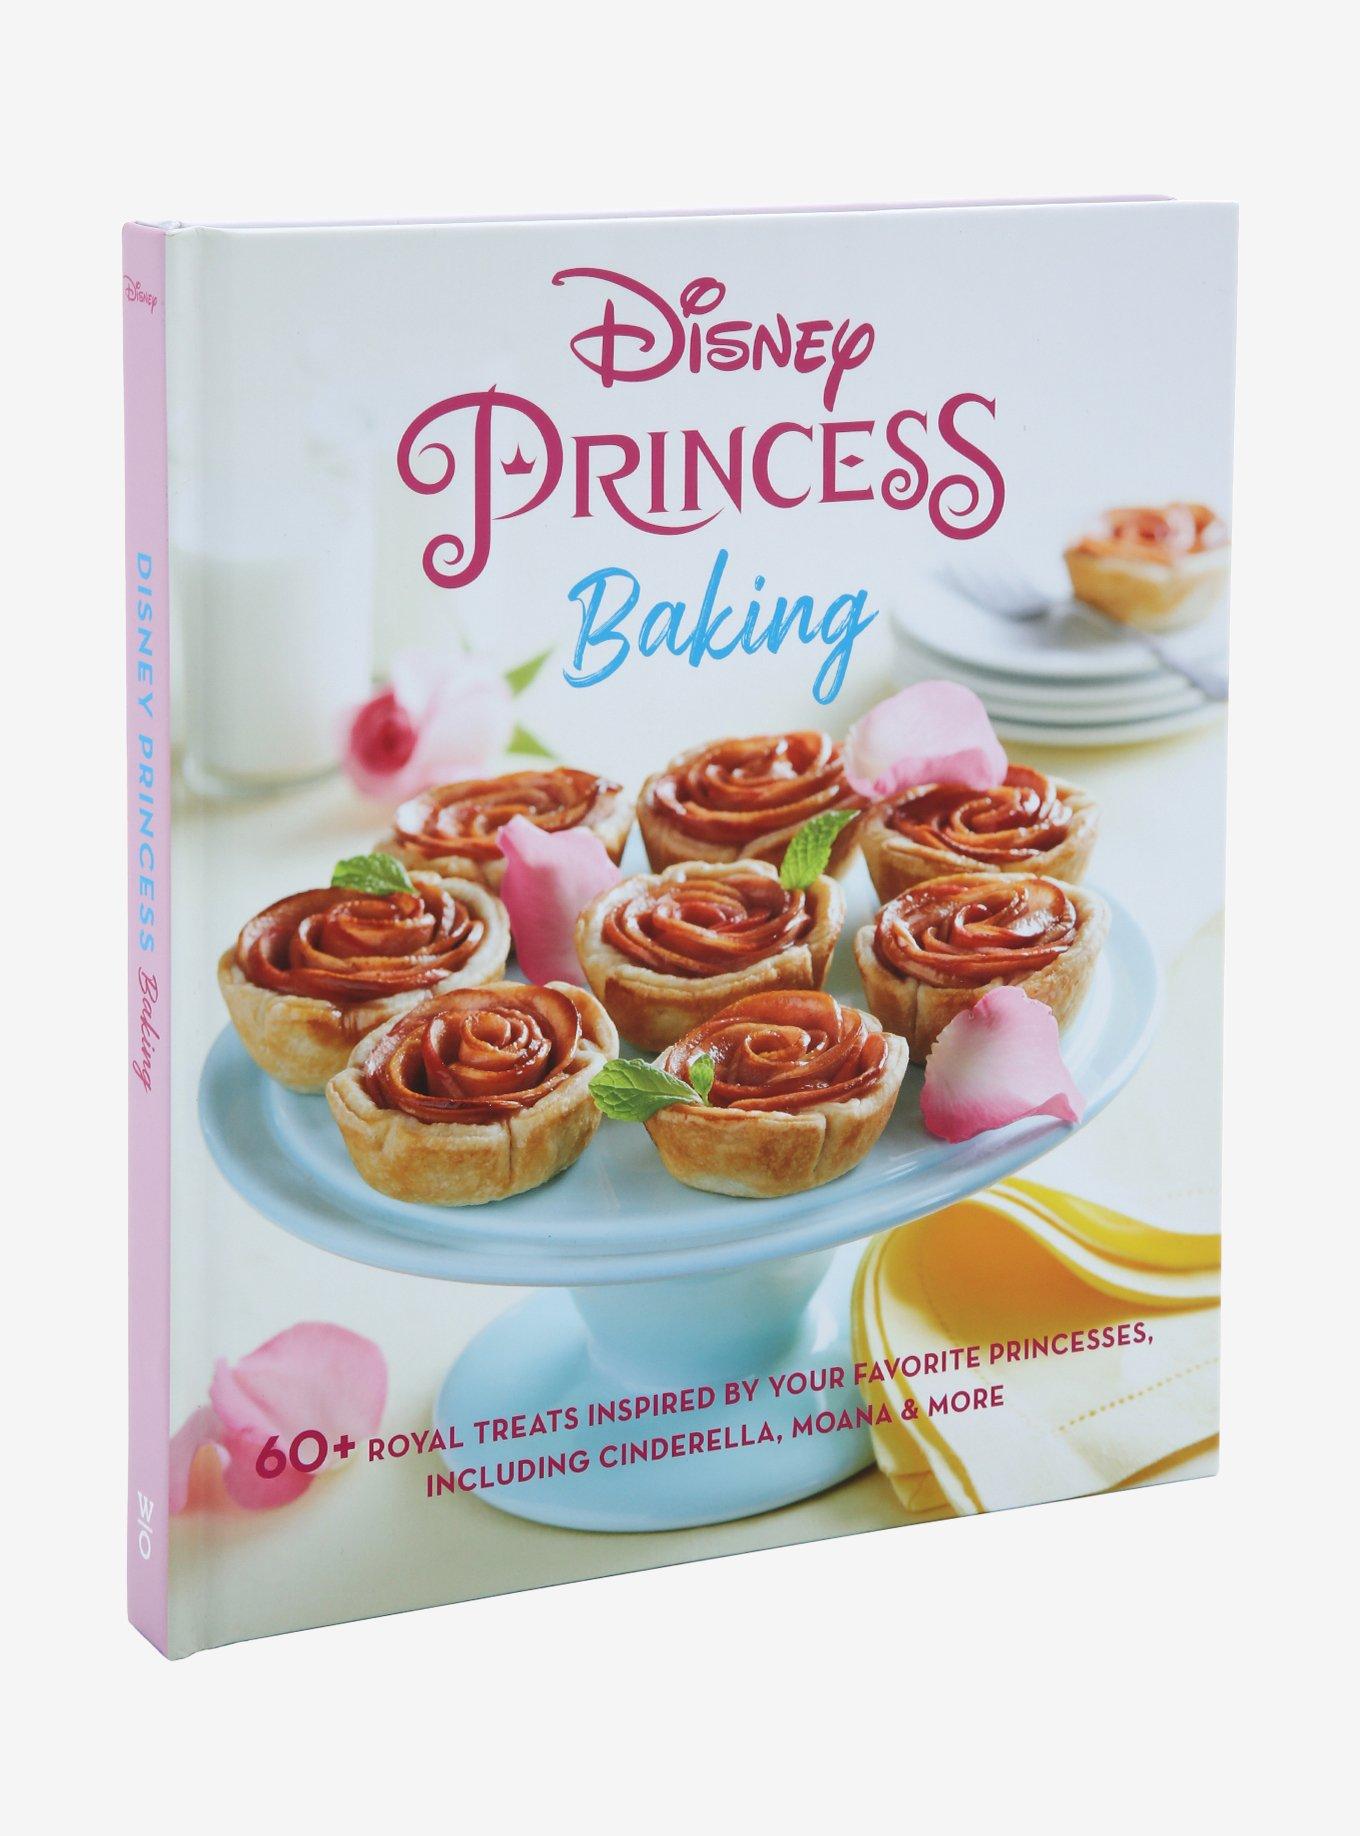 Book Review: The Disney Princess Cookbook is Fun in More Ways